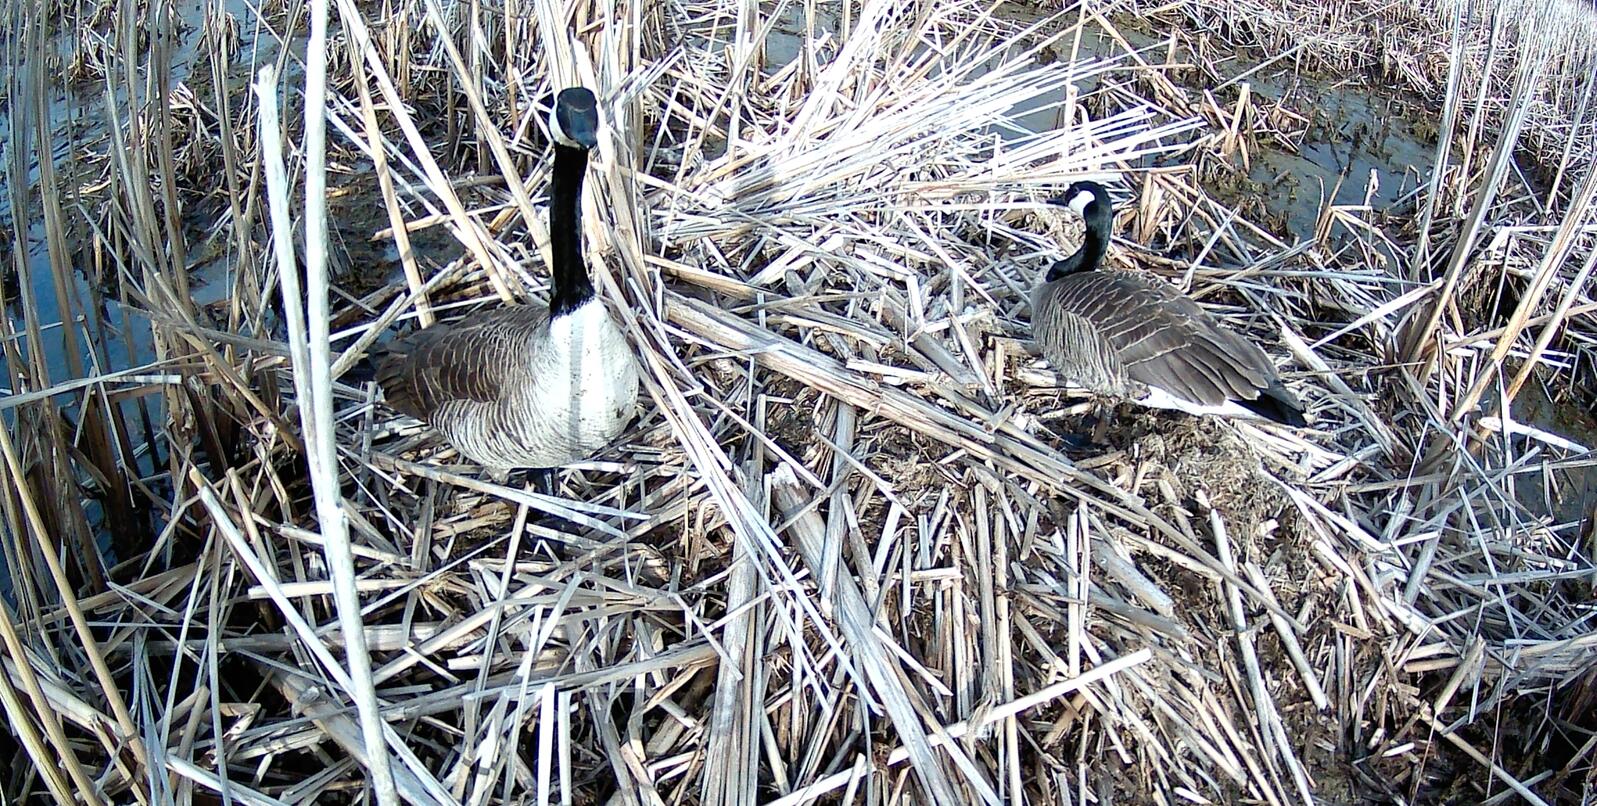 Geese and Muskrats, Unlikely Neighbors